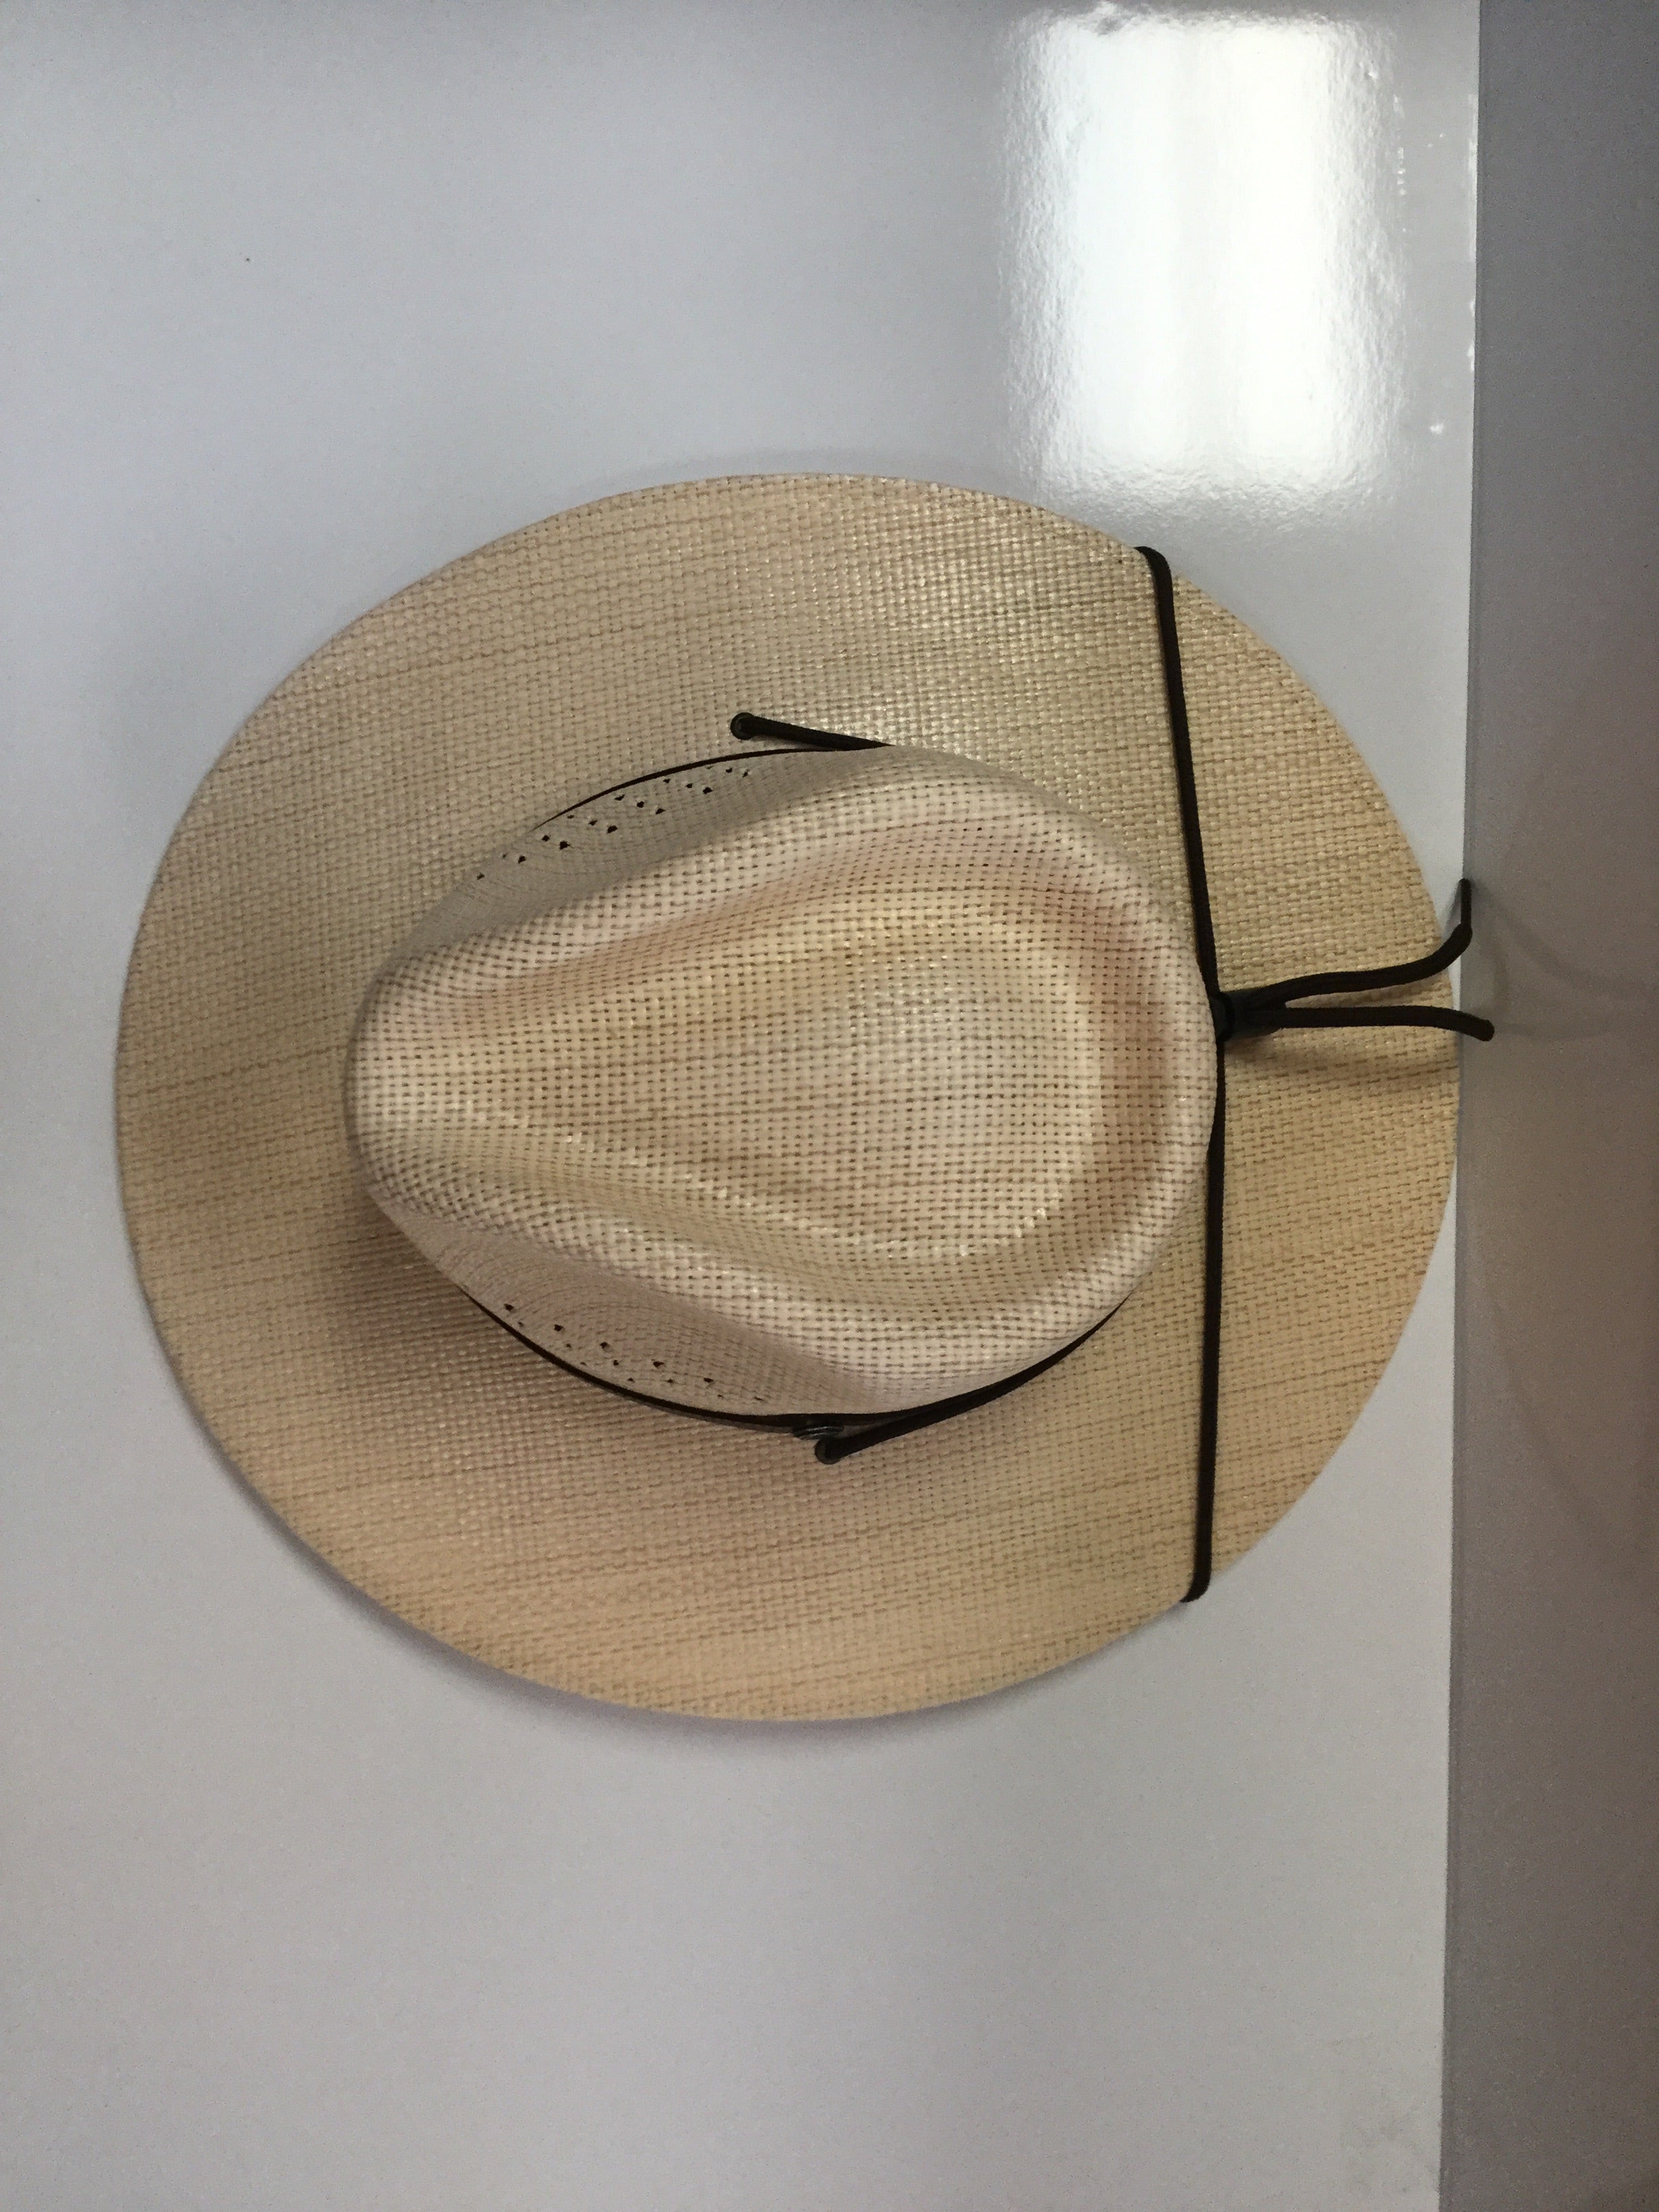 Stetson outfitter straw hat - Natural/Tan OSOTFR